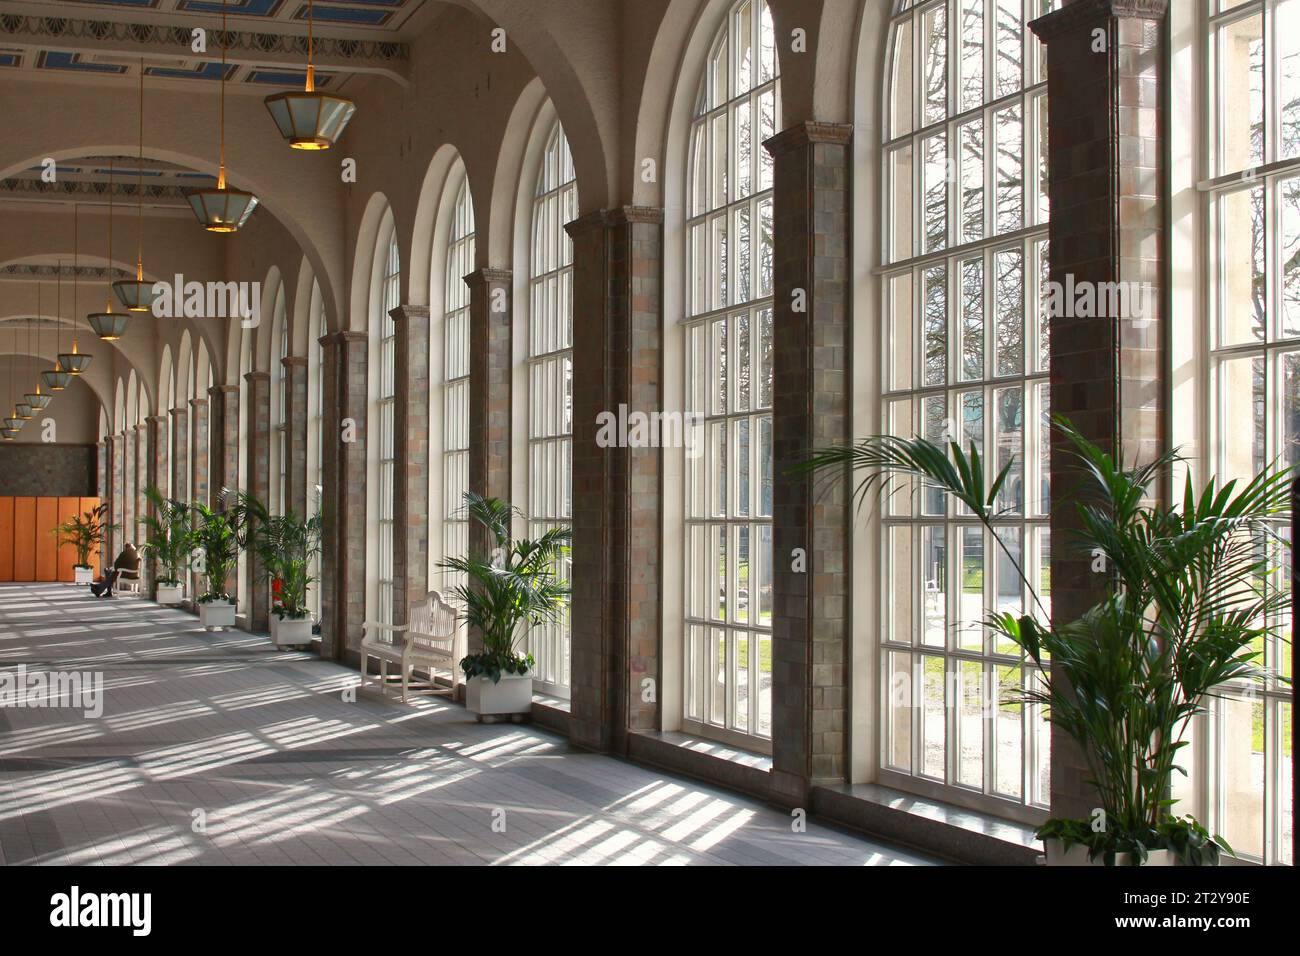 A long an high Hall with large Windows in Bad Kissingen Germany. The Sun is shining through the Windows an projecting nice lights on the Floor Stock Photo